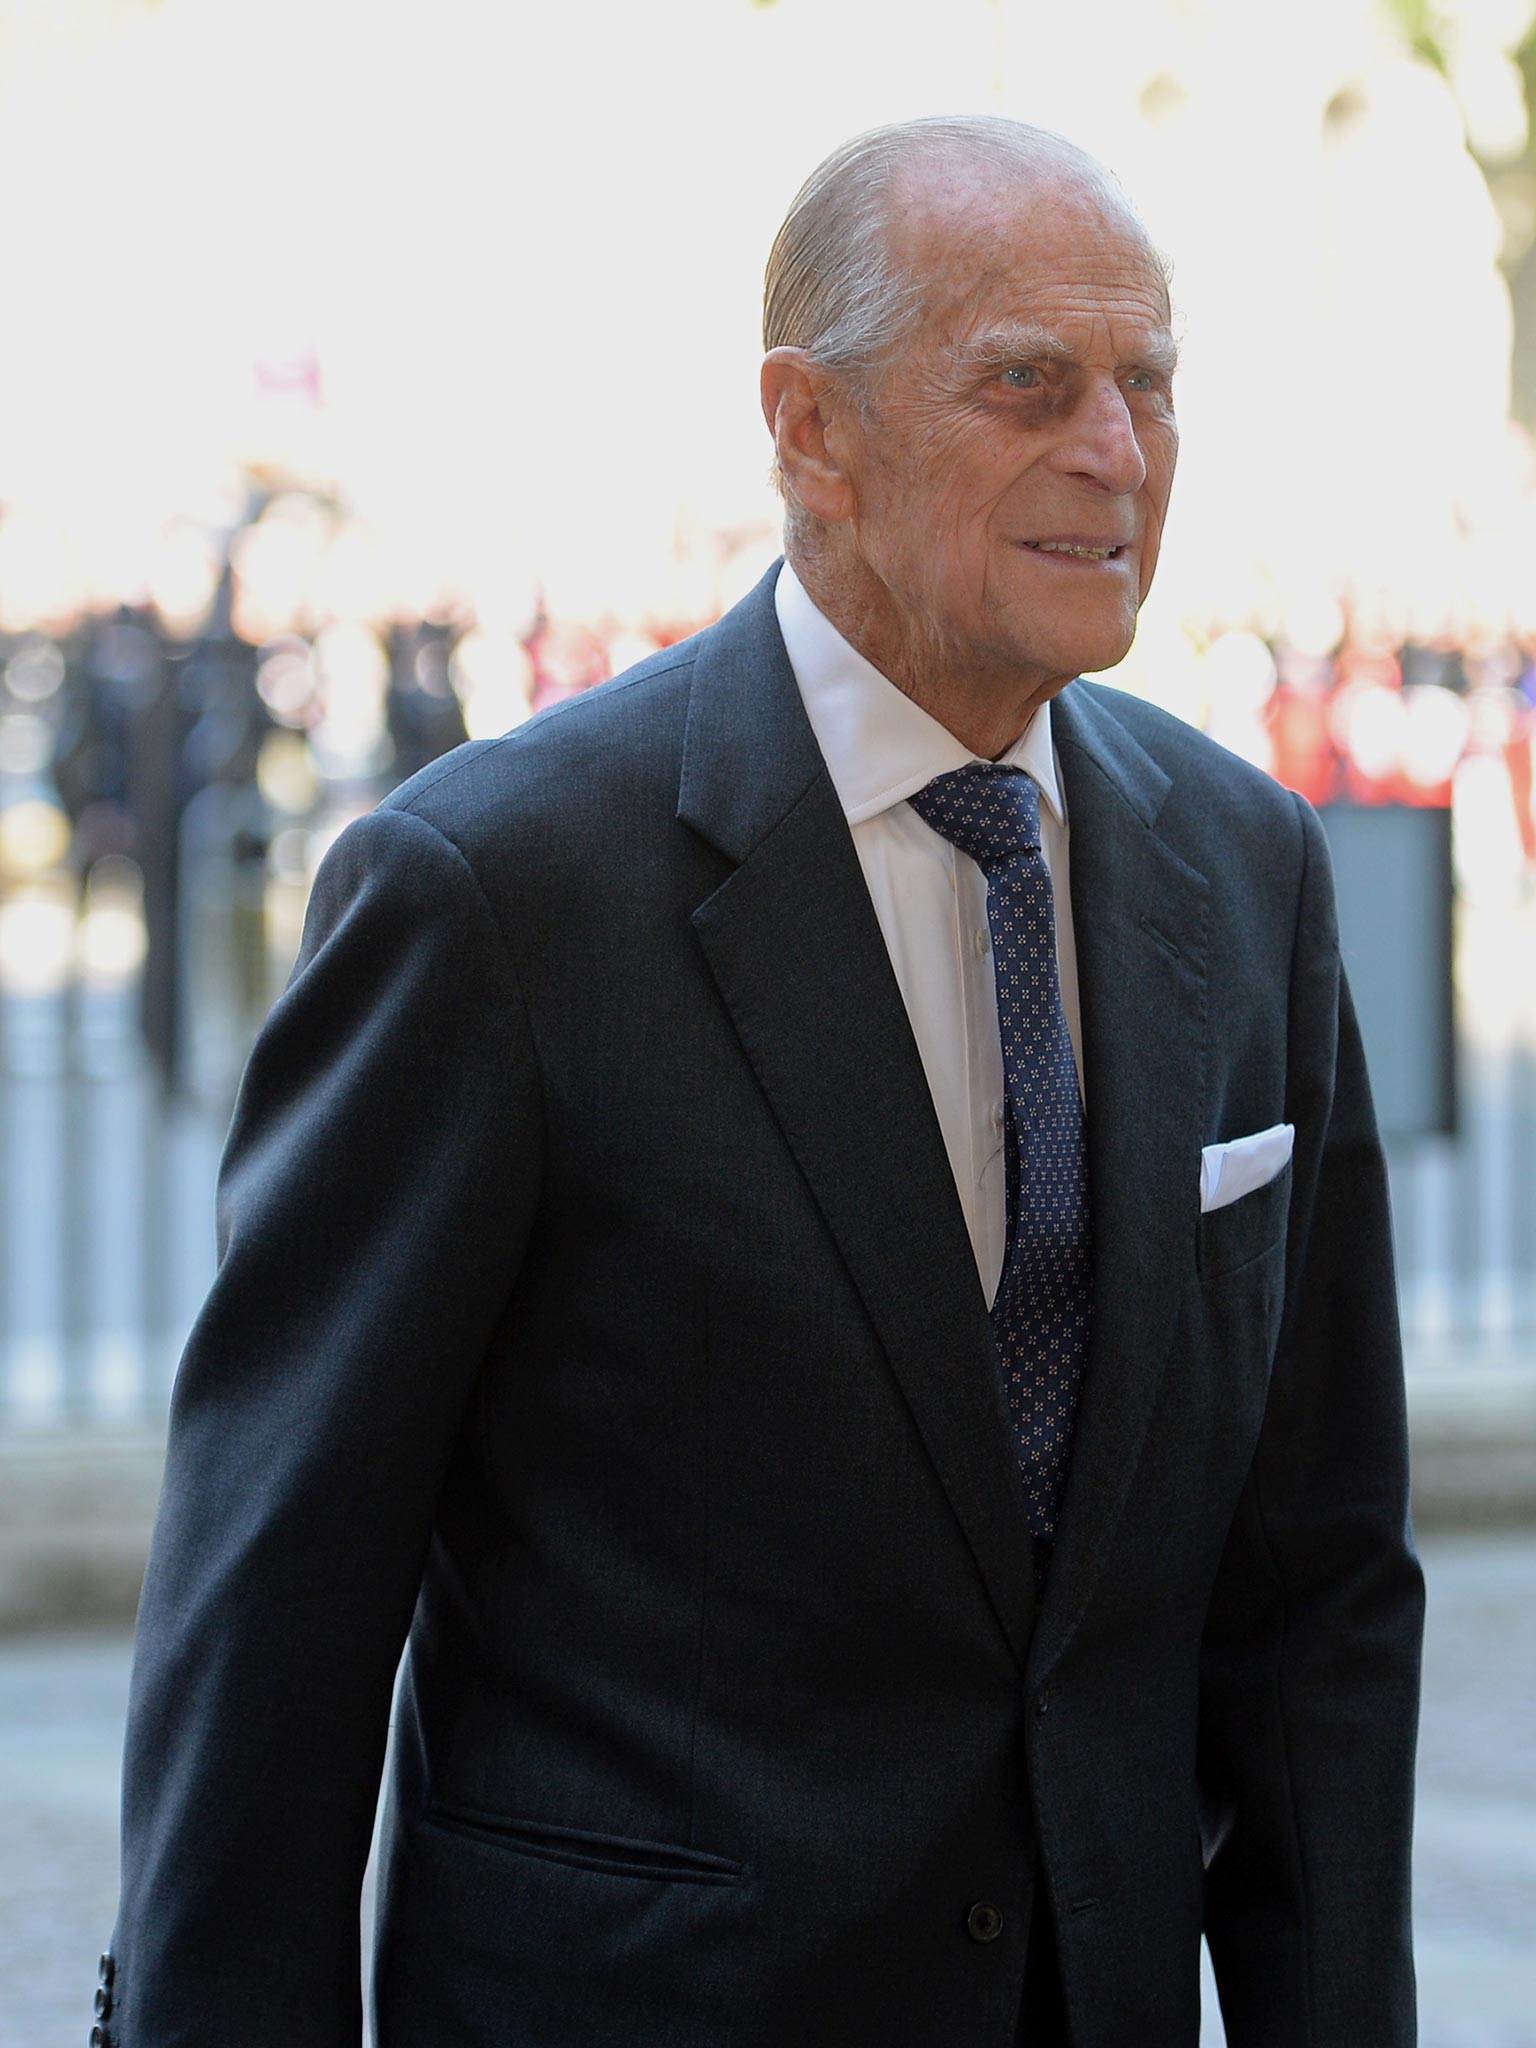 Britain's Prince Philip arrives at Westminster Abbey in London for a service to celebrate the 60th anniversary of the Coronation Service. Britain's Queen Elizabeth II, now 87, took the throne on February 6, 1952 upon the death of her father king George VI